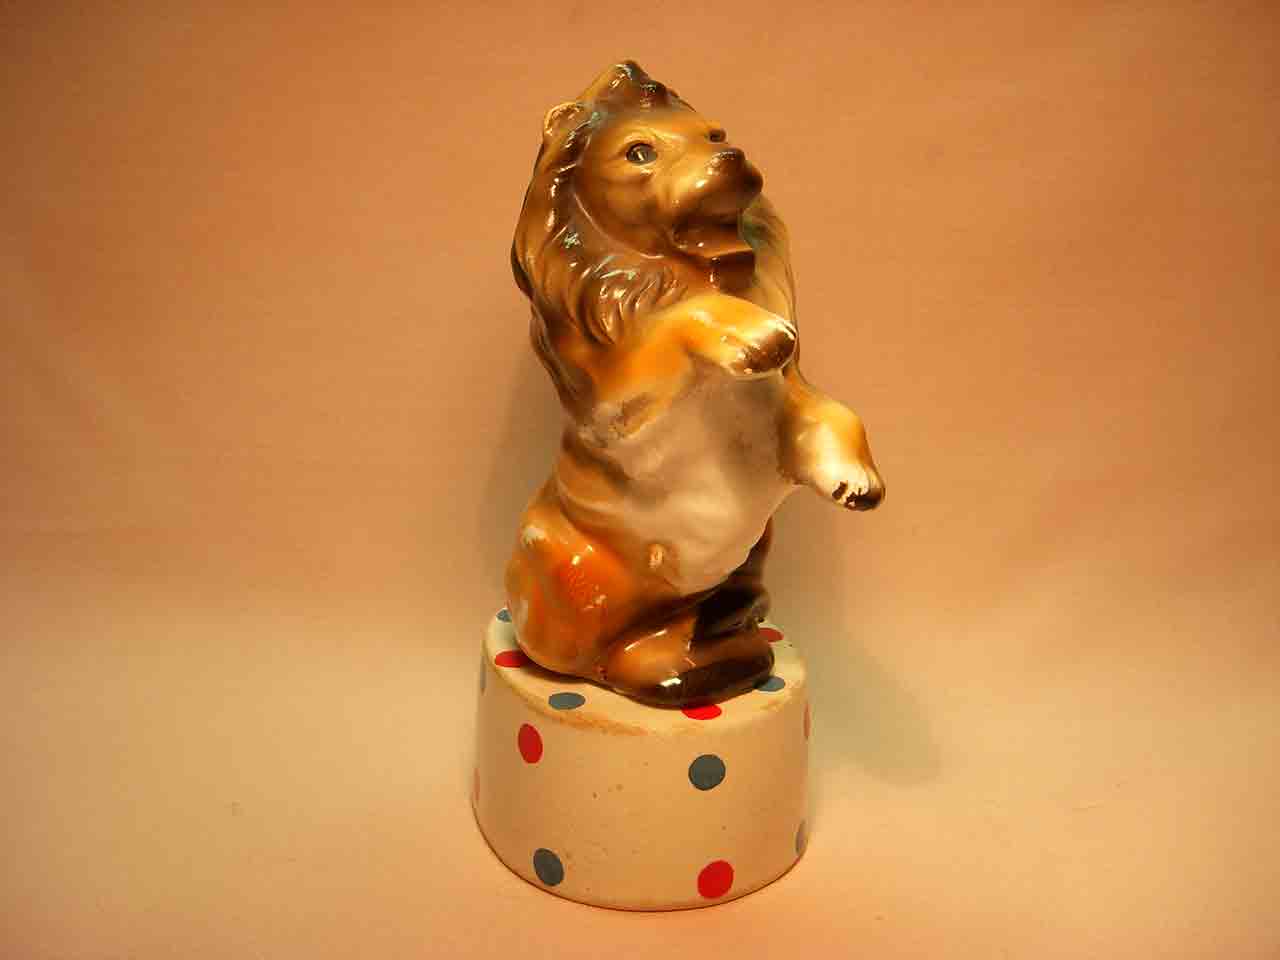 Stacker circus lion on podium salt and pepper shaker